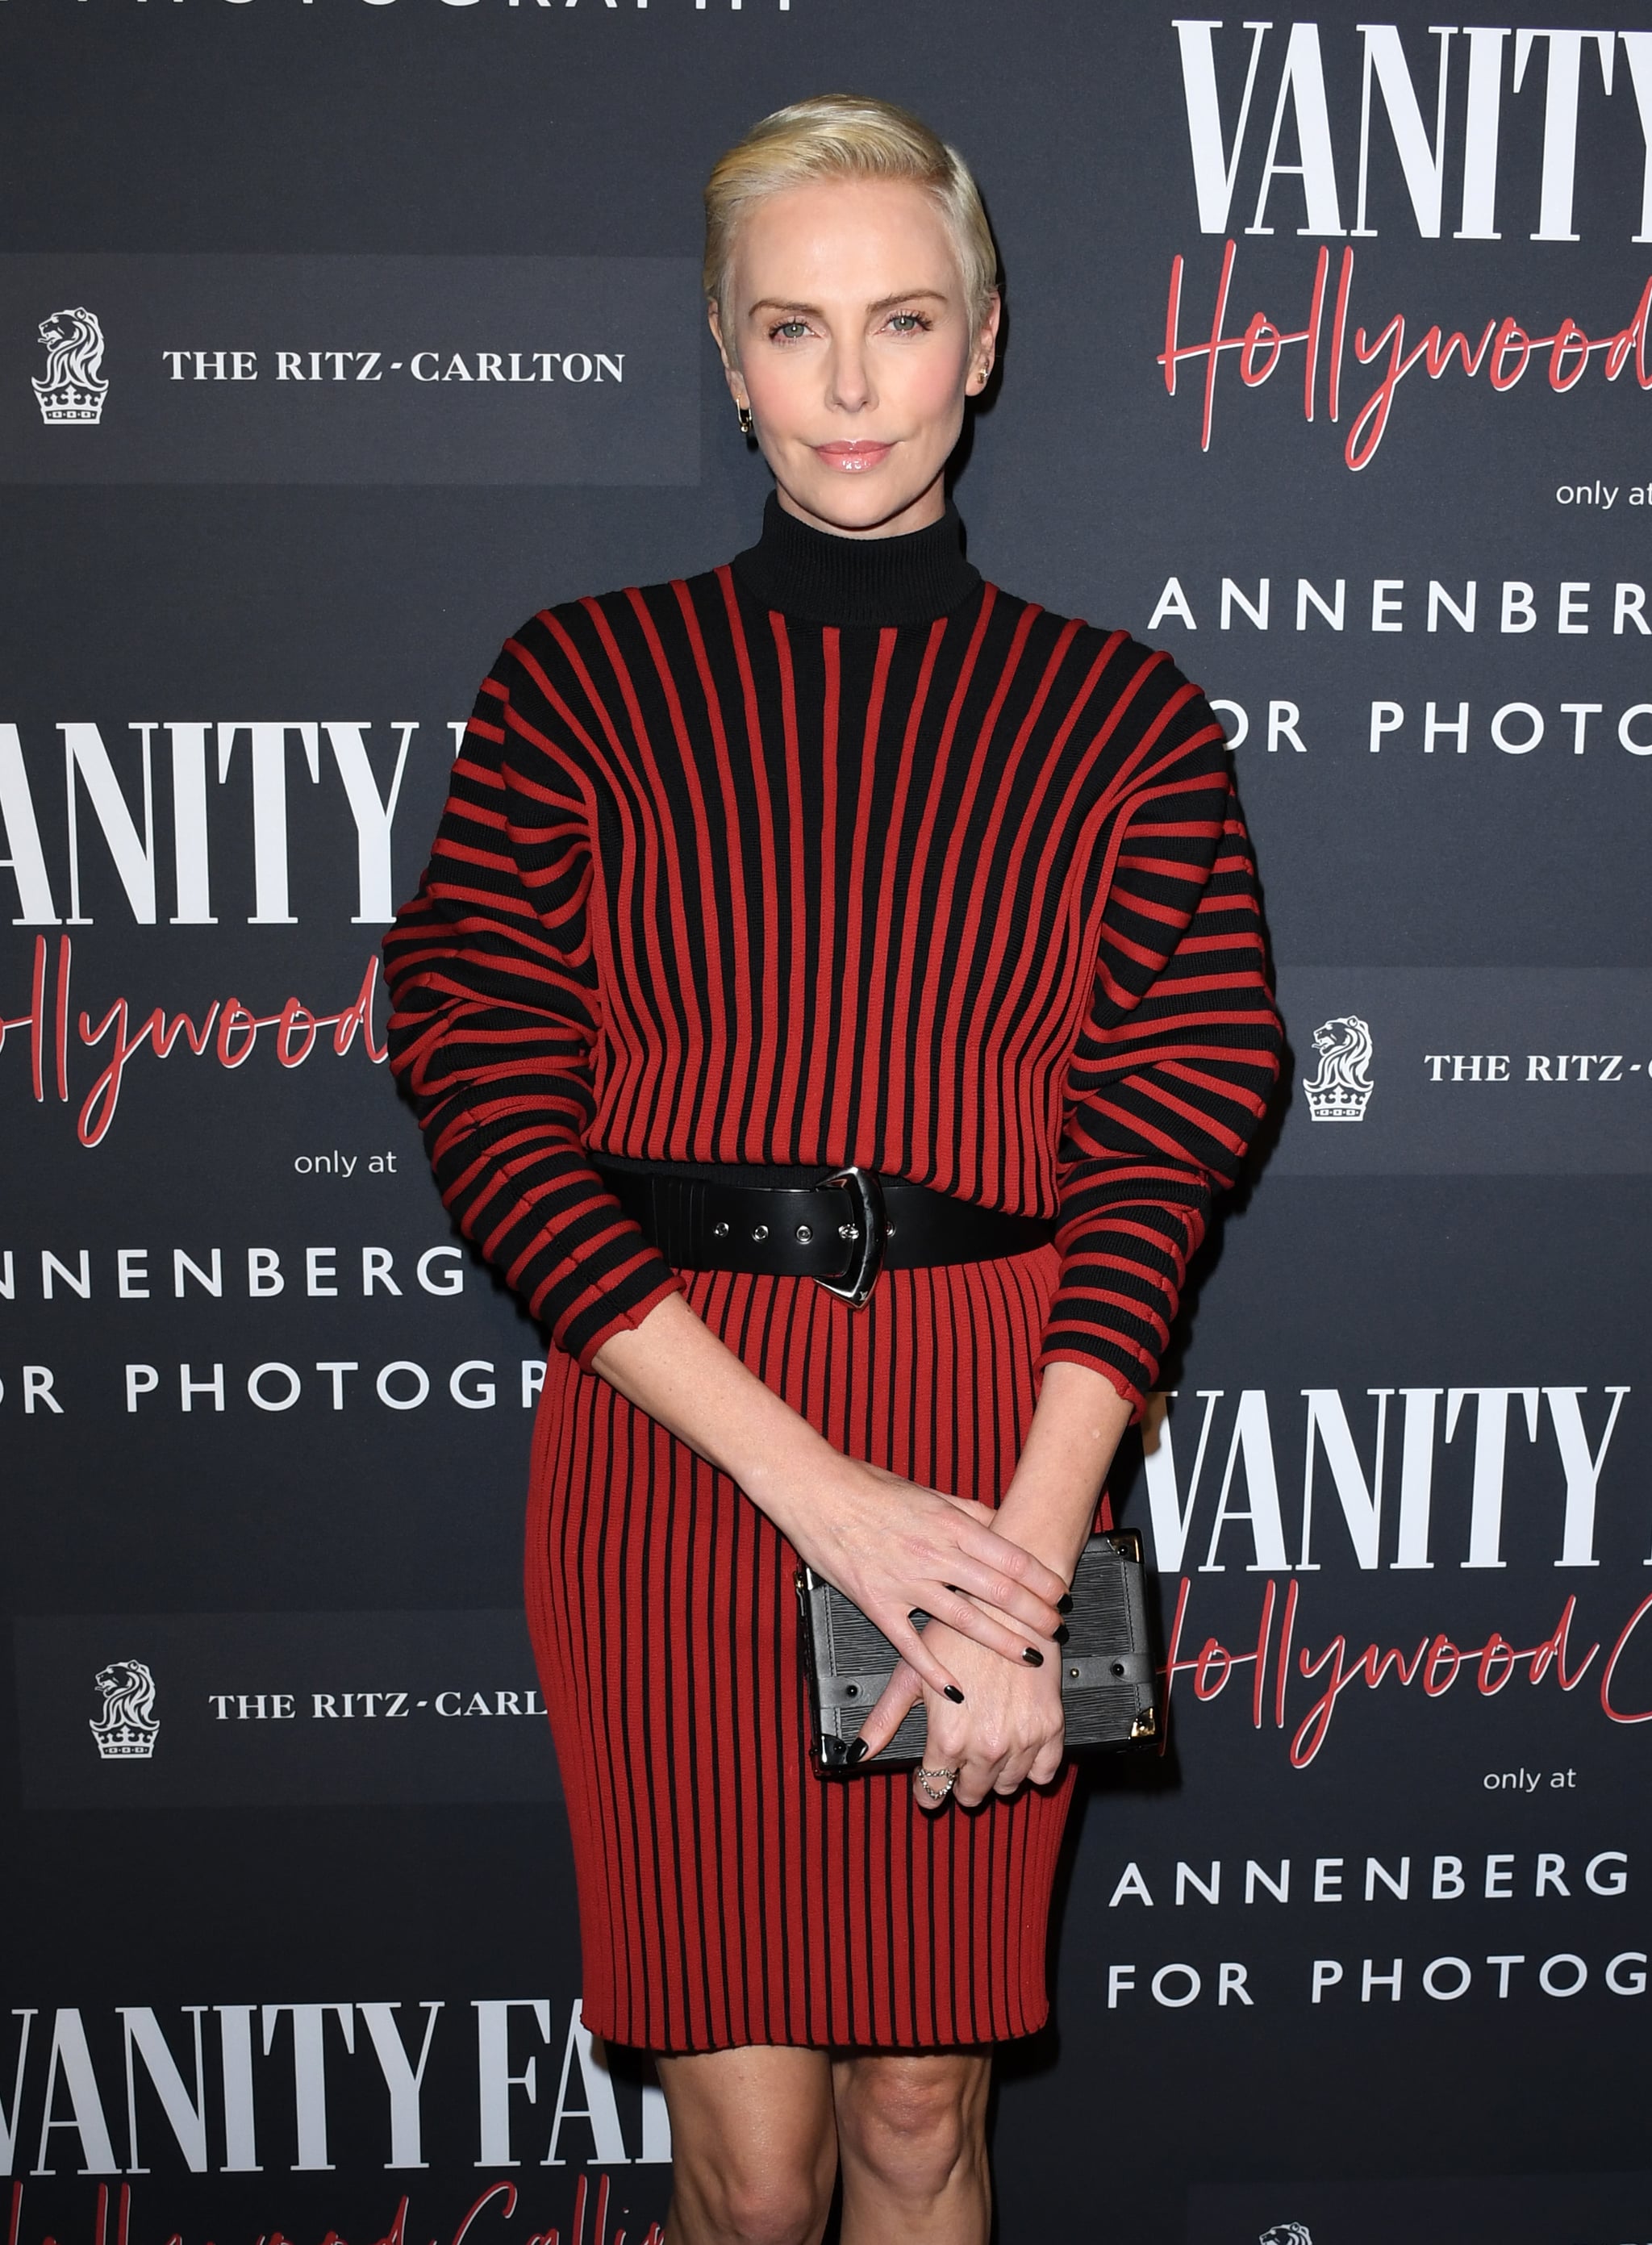 Charlize Theron Vanity Fair: Hollywood Calling Opening February 4